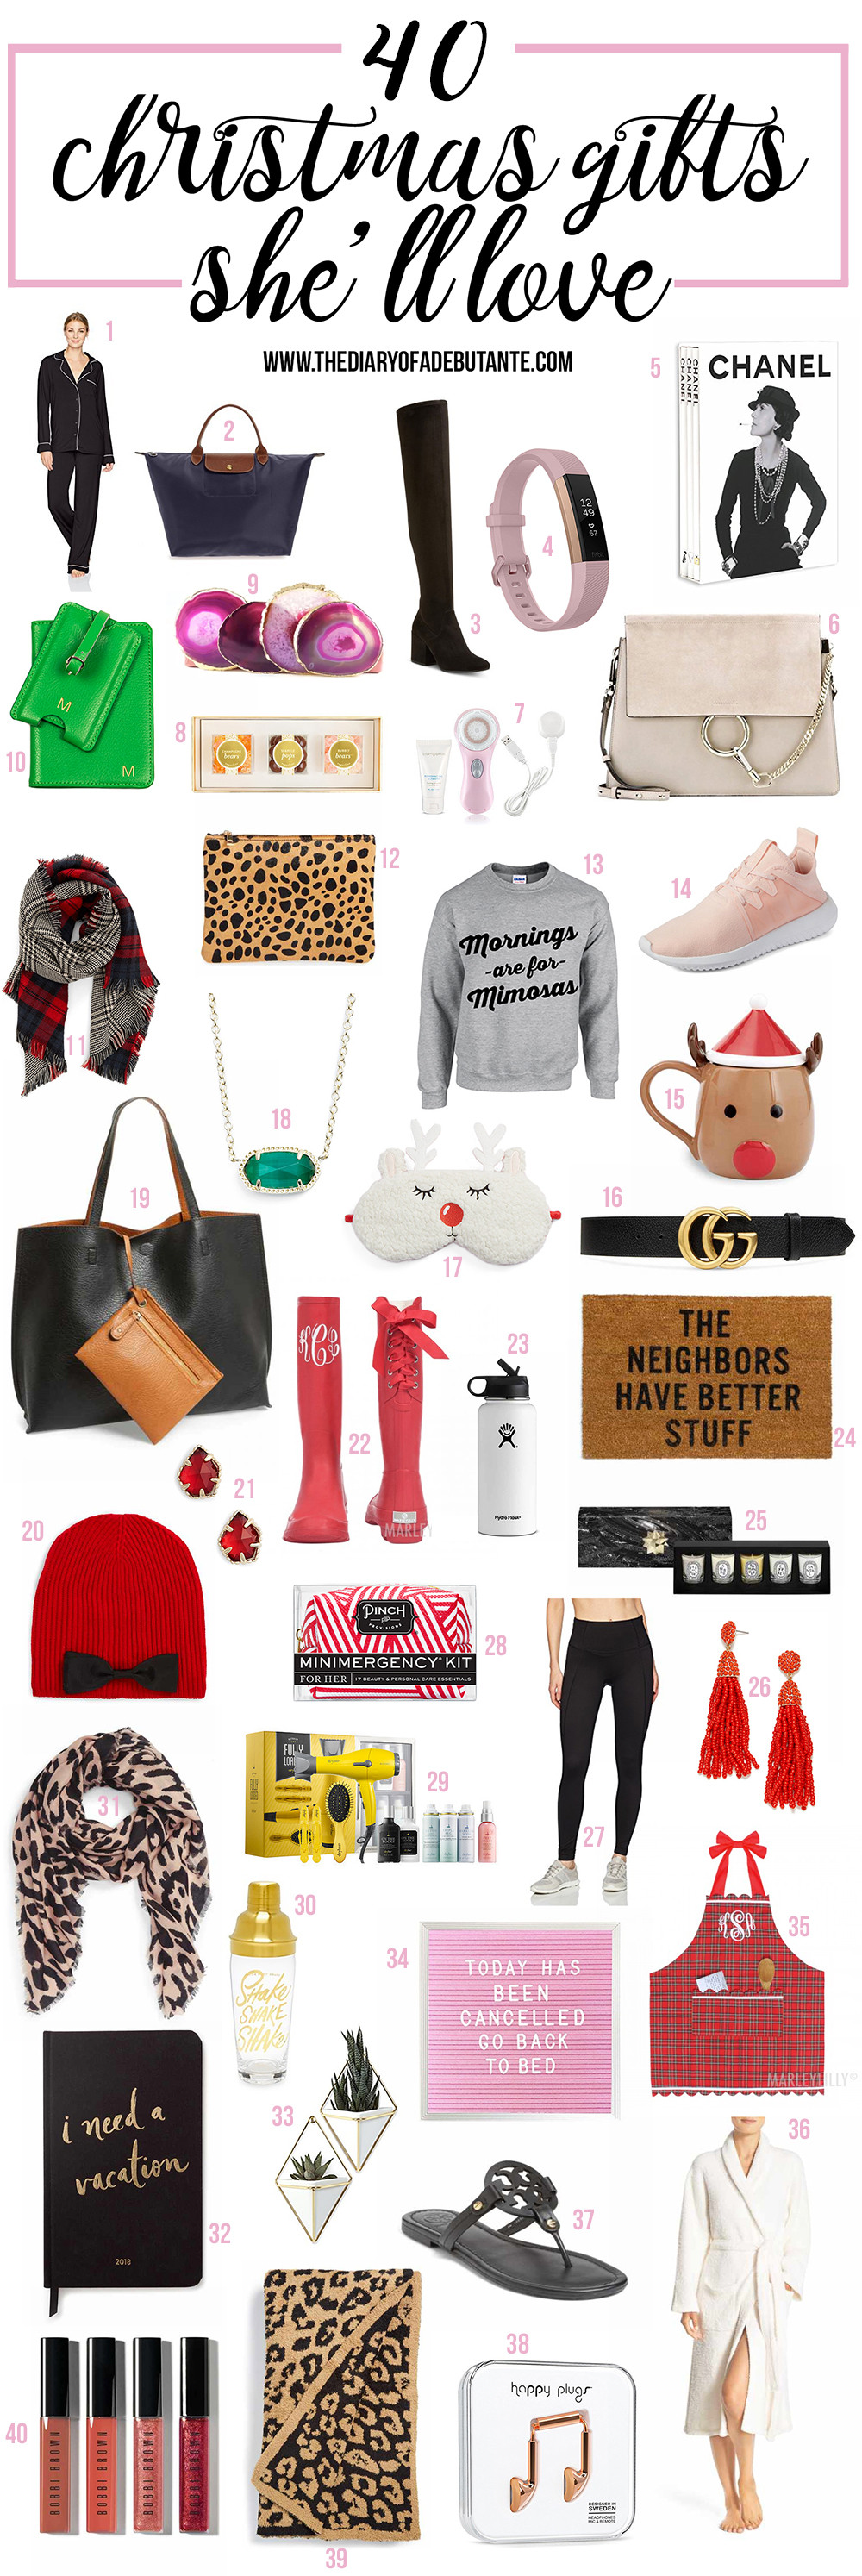 Gift Ideas For Girlfriend Christmas
 Cool Gift Ideas for Girlfriend Mom or BFF this Holiday